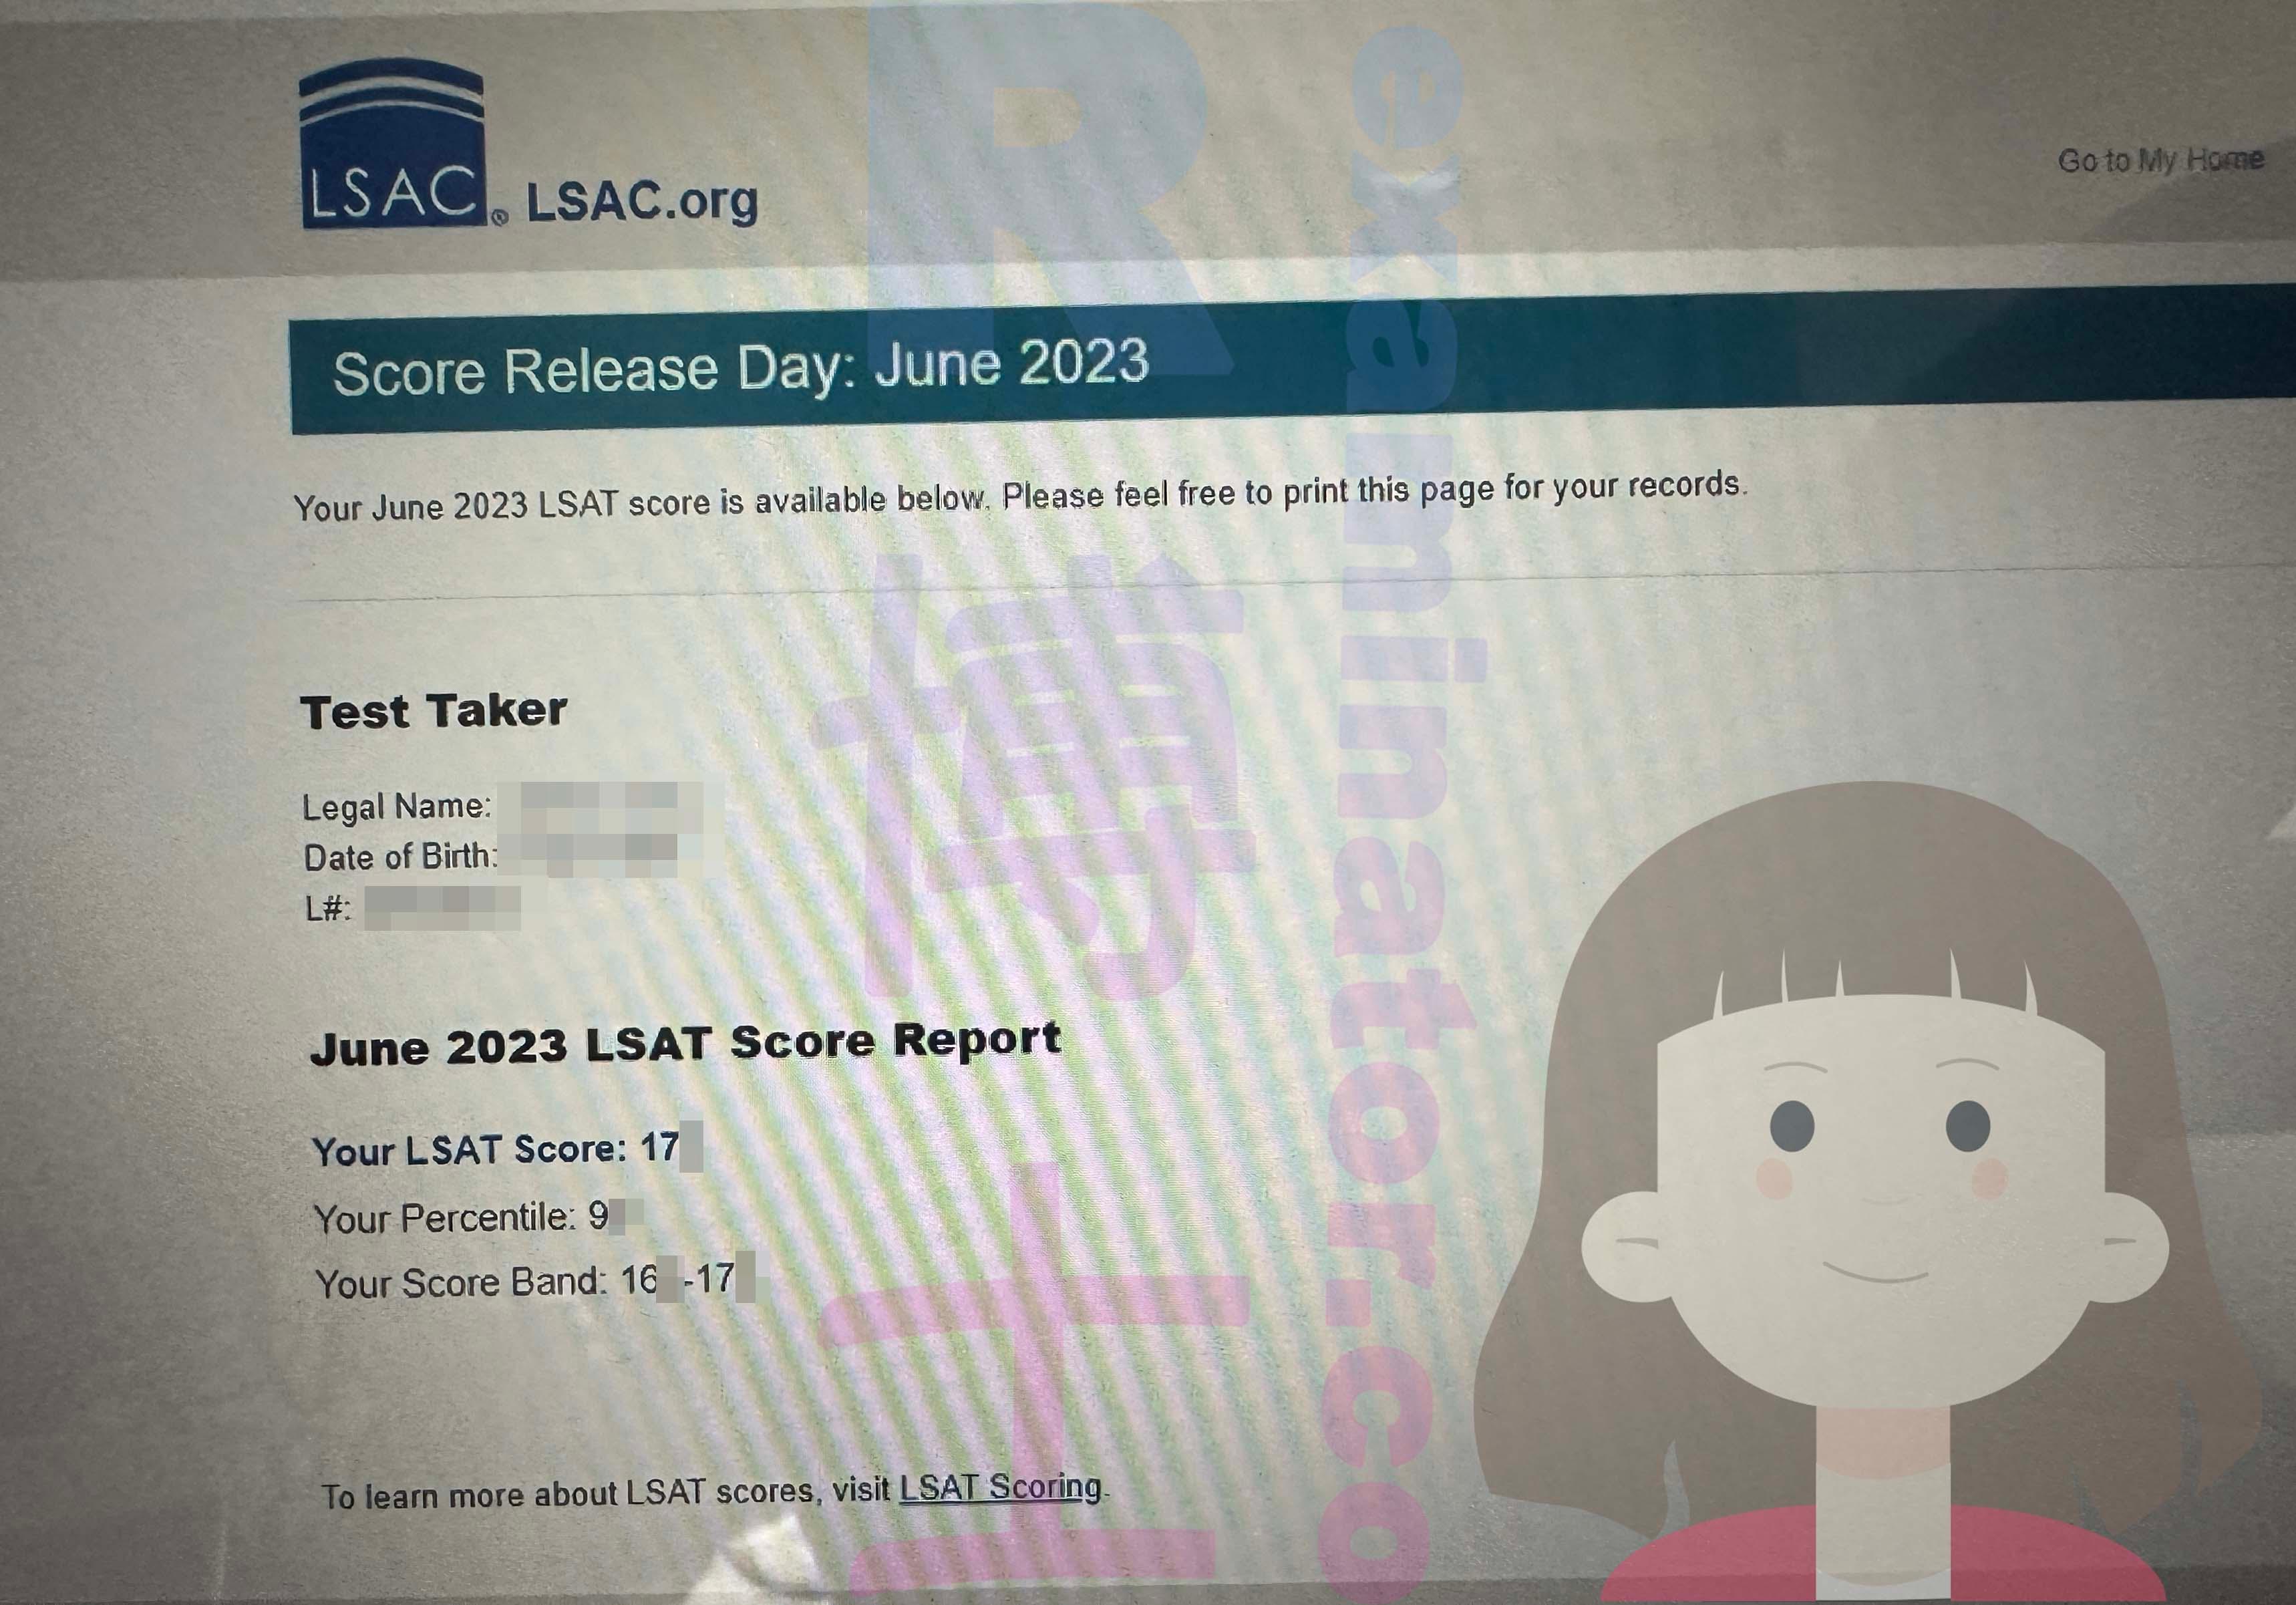  🇨🇦🇨🇳 From Skeptic to Ecstatic: Chinese Student in Canada Achieves an Astounding 17X Score on June LSAT! Raves About Our Proxy Testing Service in a Glowing Review! 🌟